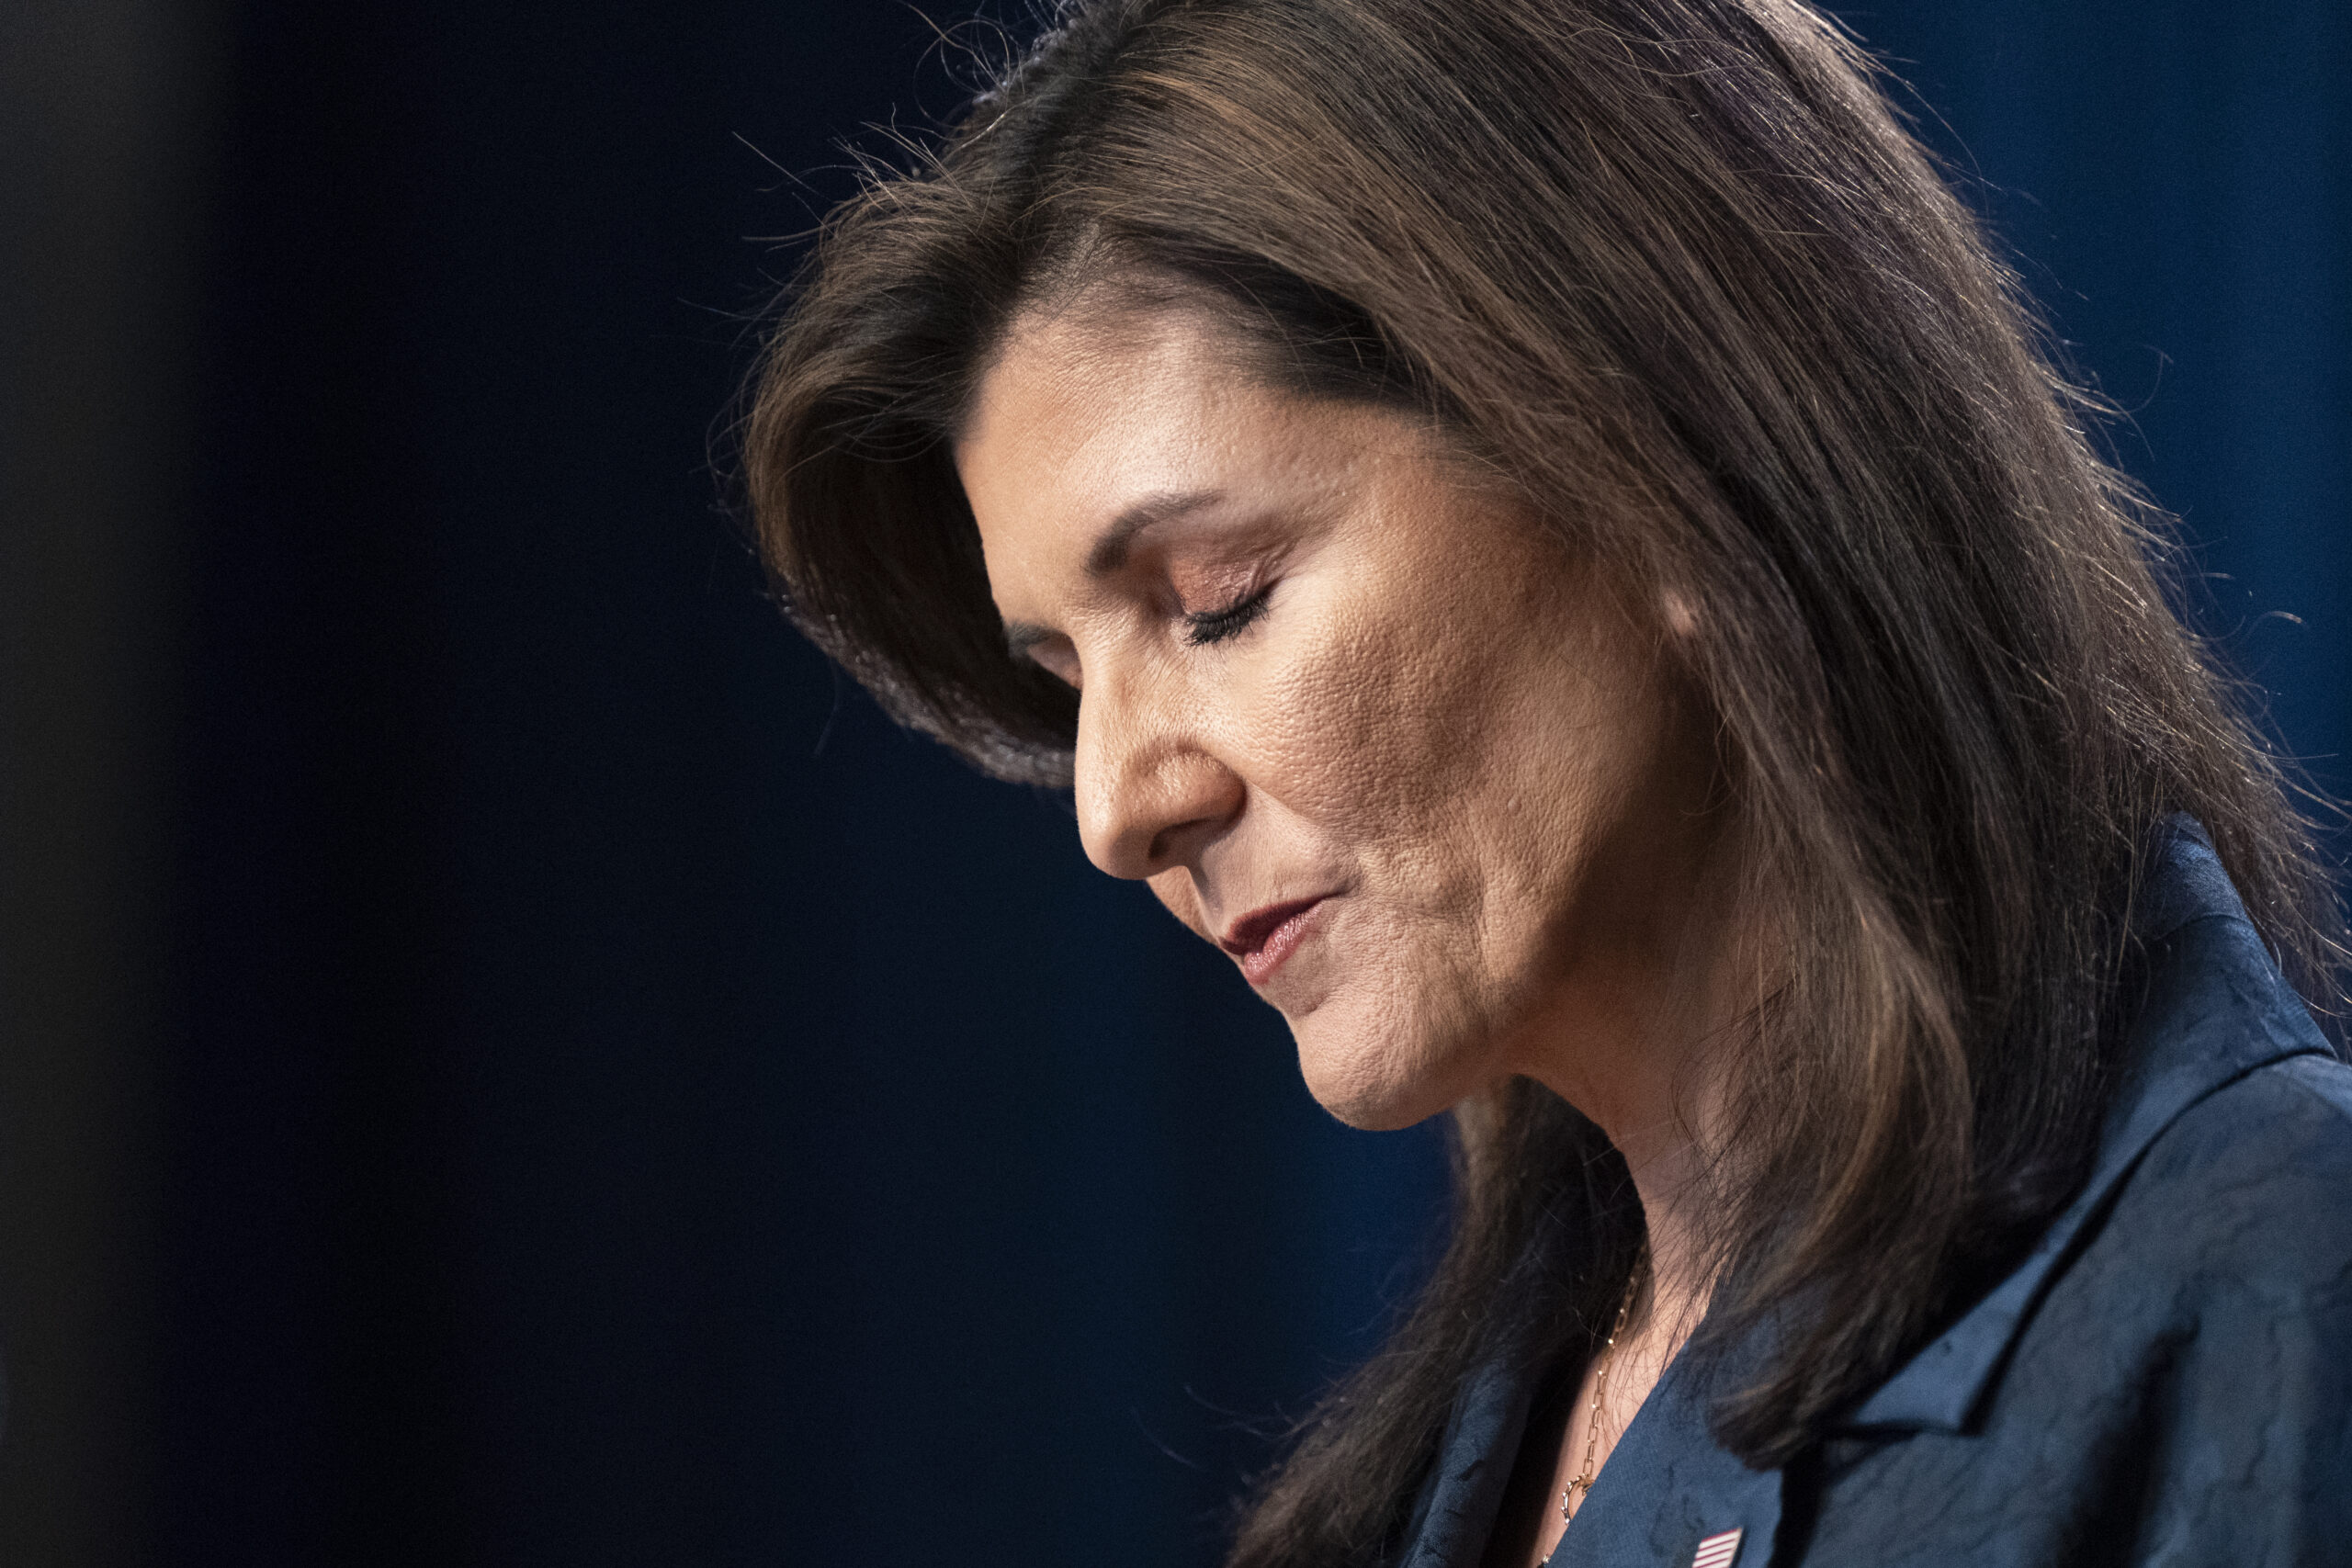 The Democrats Paying for Nikki Haley to Stay in the Race